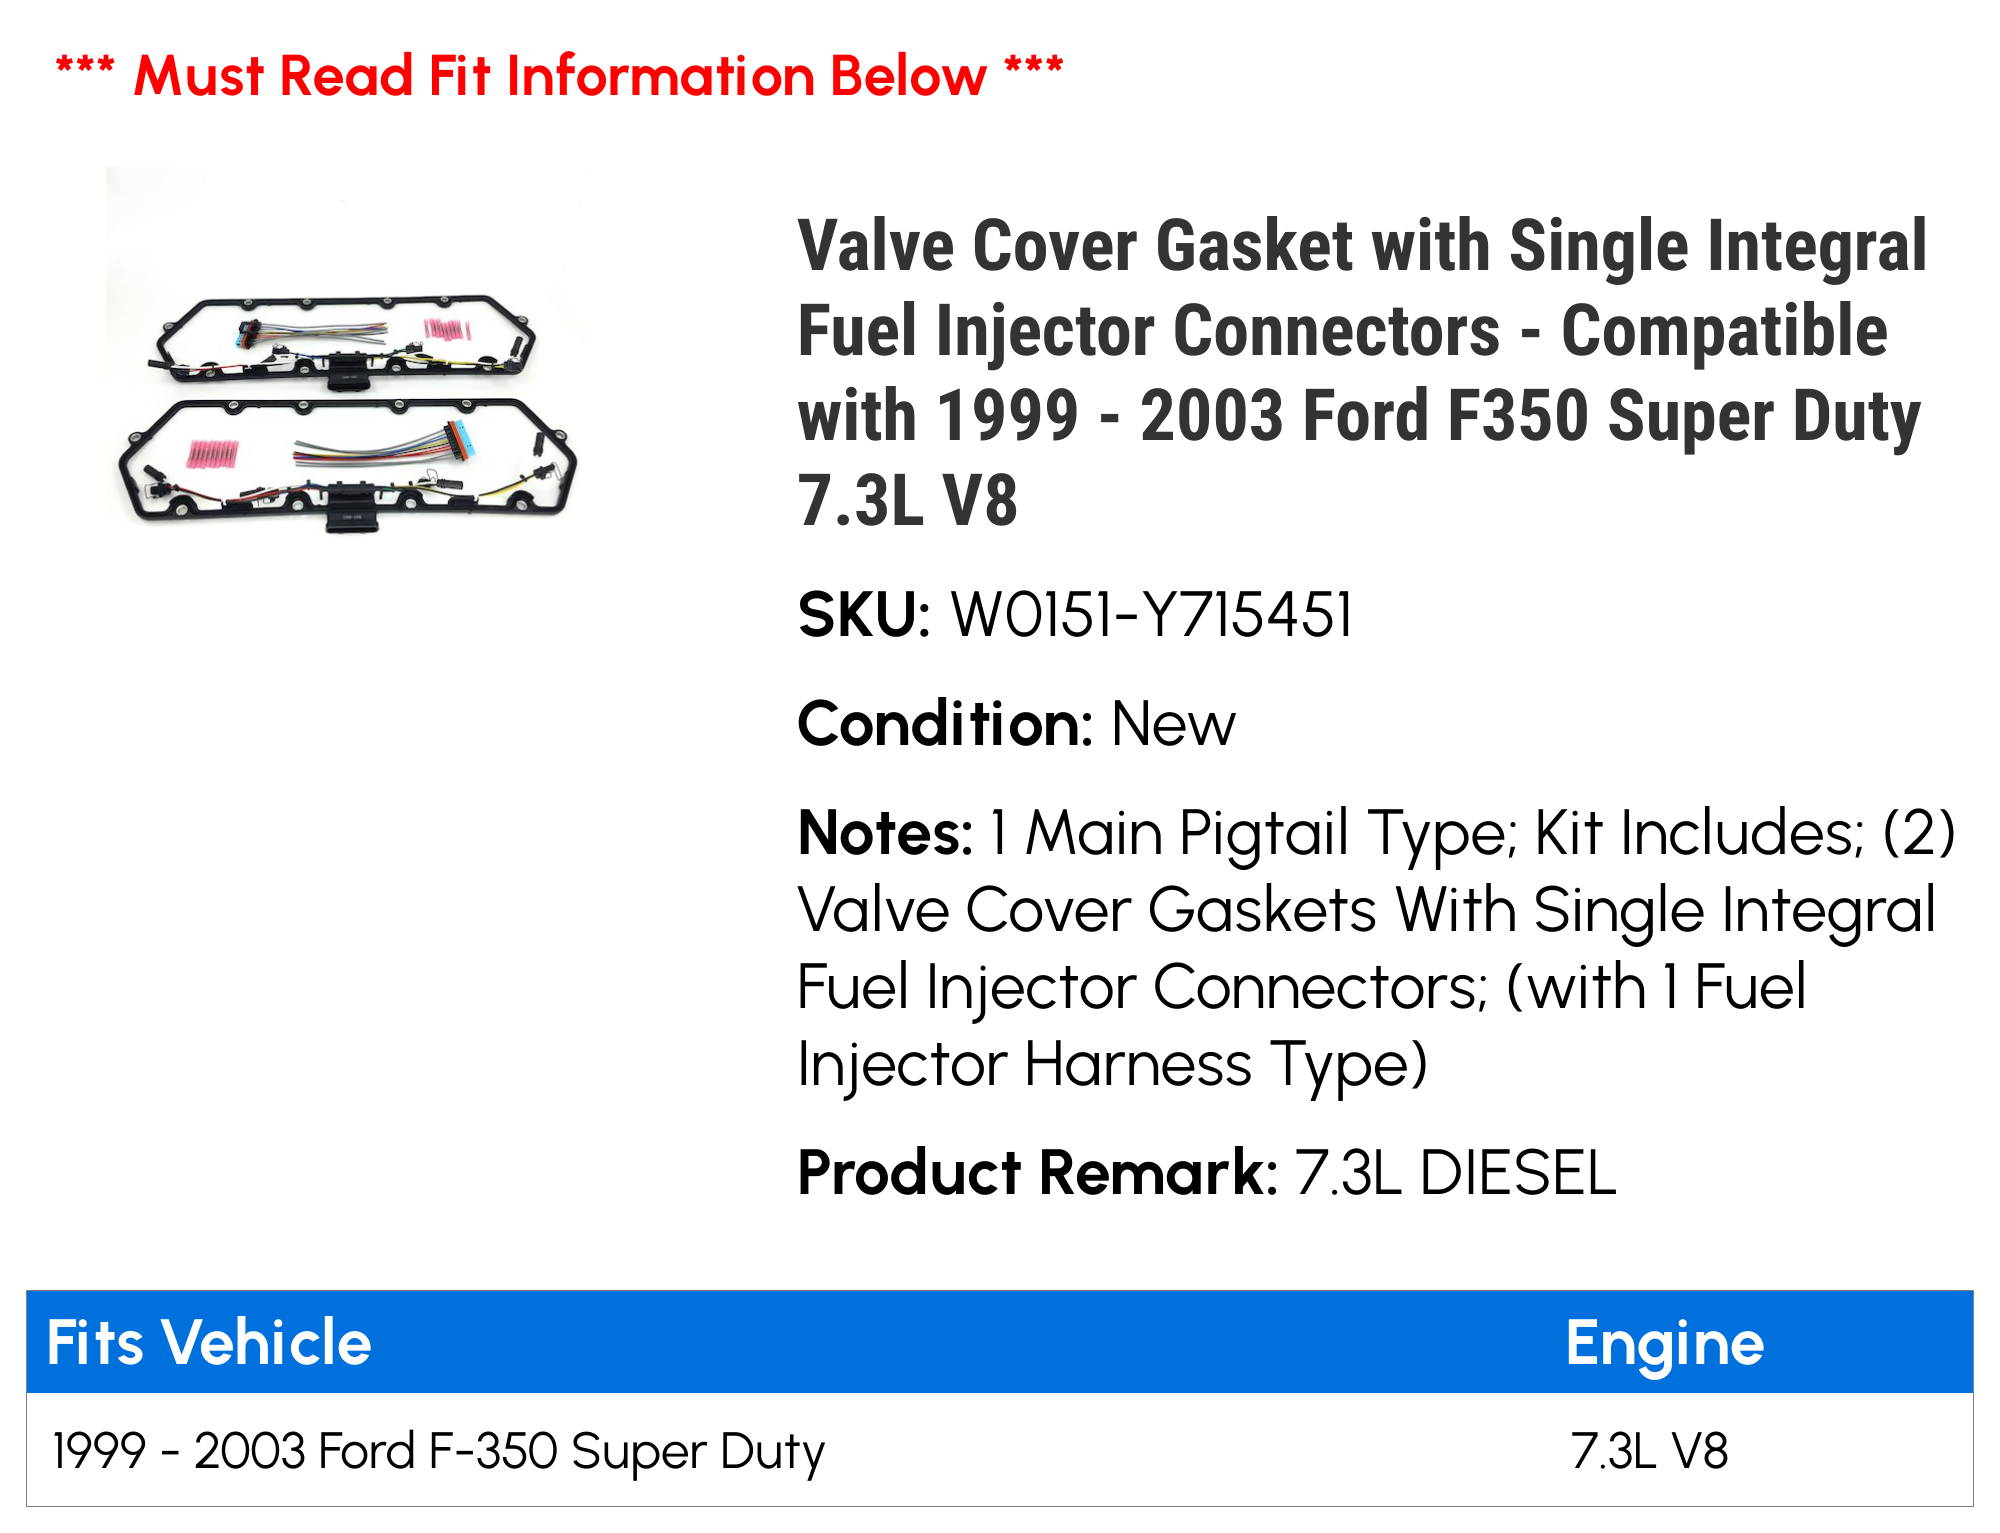 Valve Cover Gasket with Single Integral Fuel Injector Connectors  Compatible with 1999 2003 Ford F350 Super Duty 7.3L V8 2000 2001 2002 